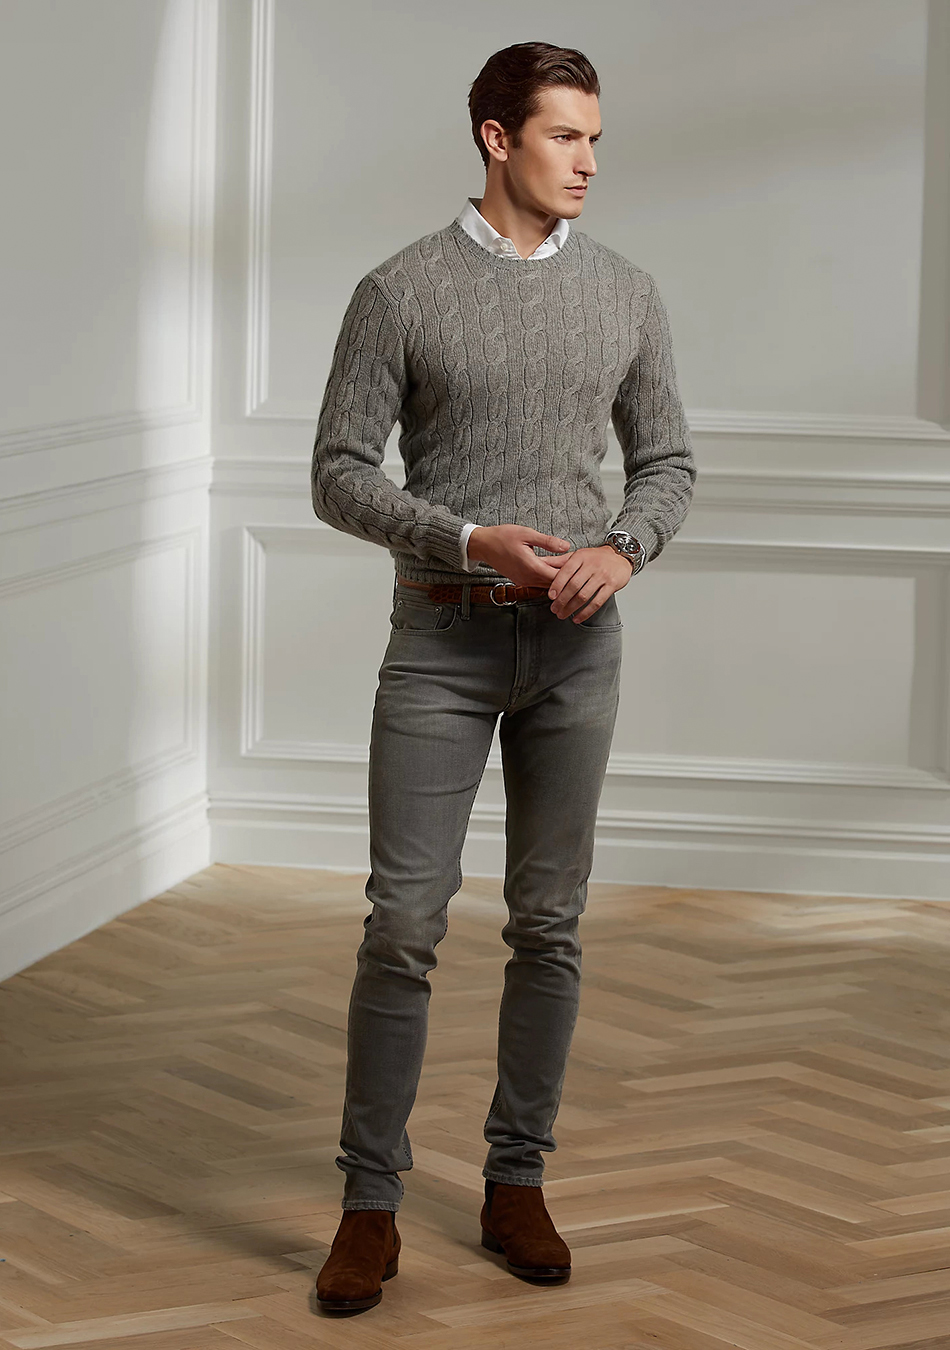 Grey sweater, white shirt, grey jeans, and brown Chelsea boots